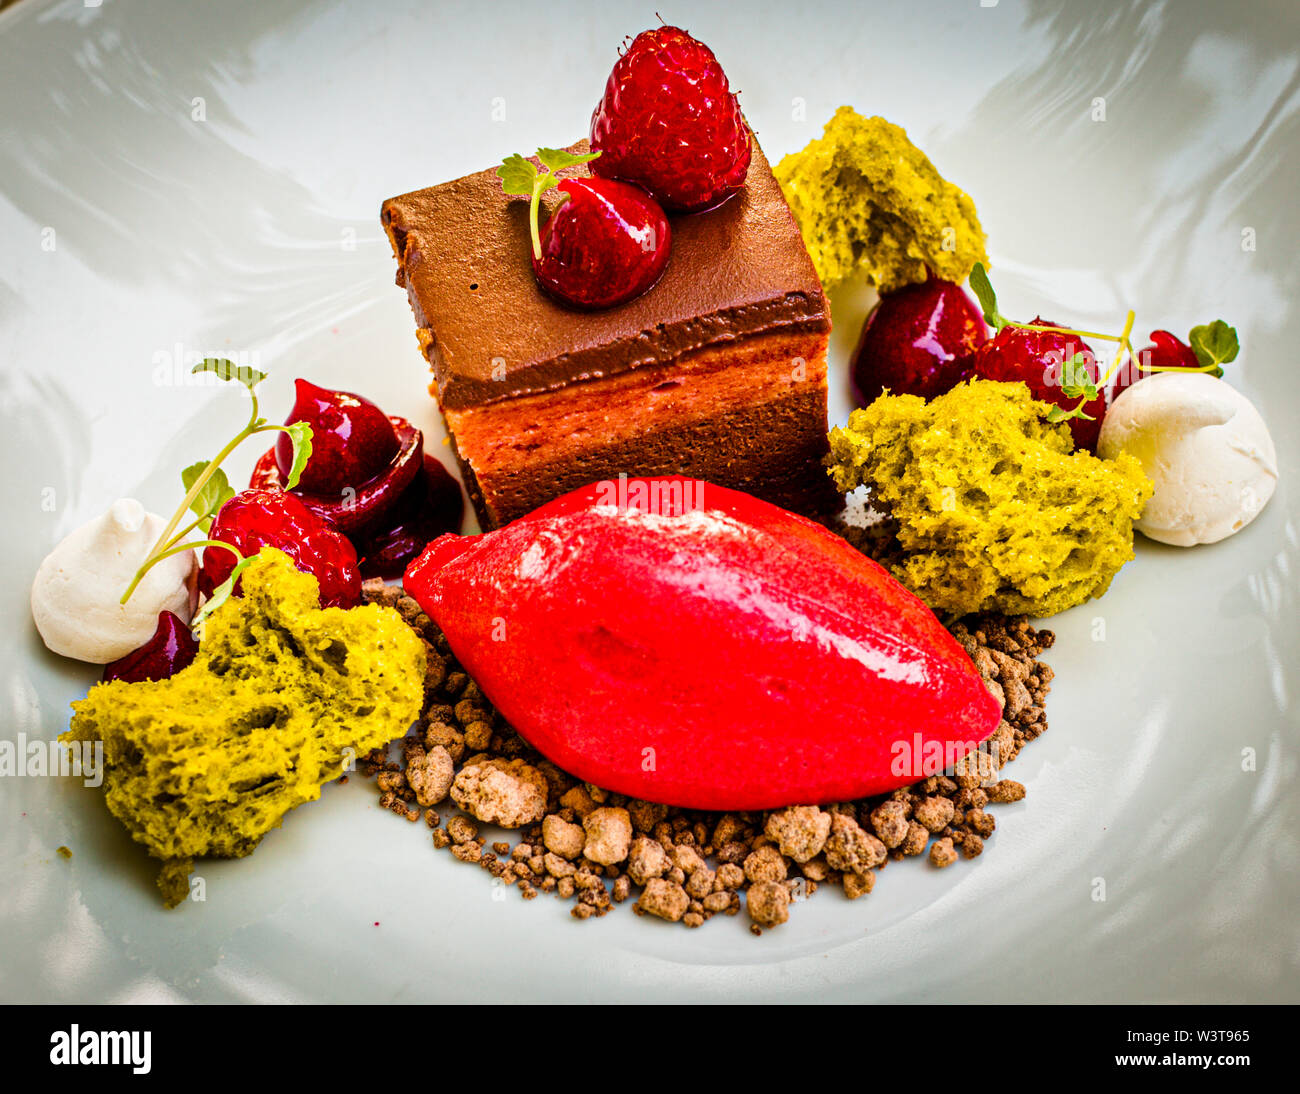 Dish of Michelin Star Kitchen Chef Frederik Desch of Laudensacks Restaurant, Bad Kissingen, Germany. Raspberry meets chocolate: as a tartlet, sorbet marinated with chocolate crumble and pistachio Stock Photo